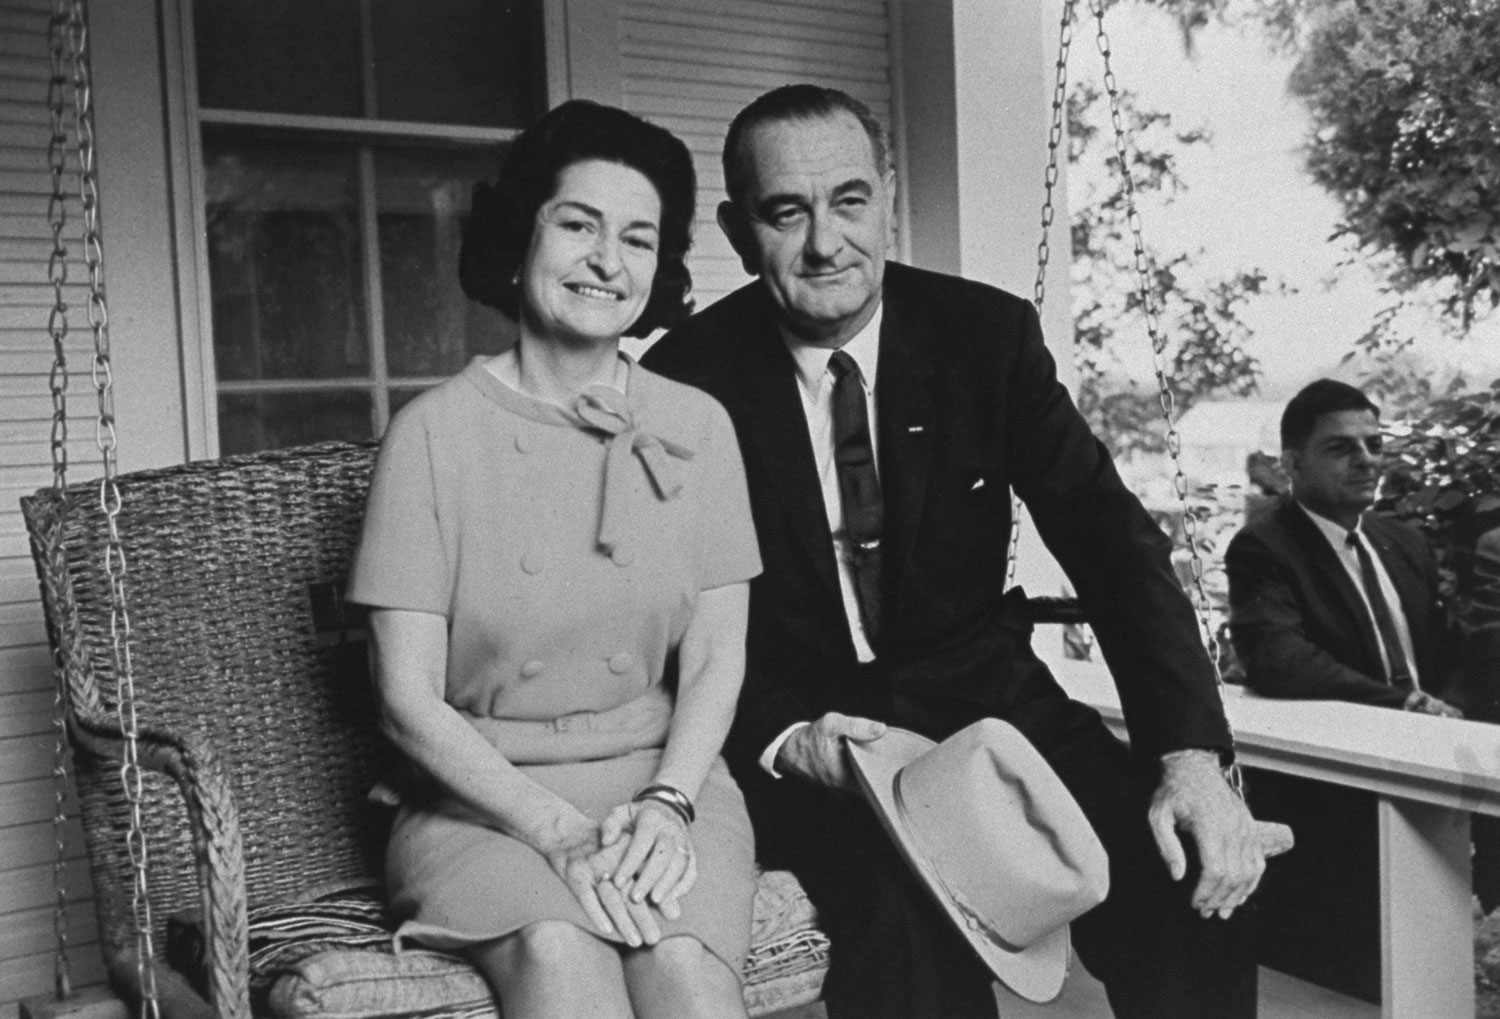 President-elect Lyndon B. Johnson and his wife, Claudia "Lady Bird" Johnson, after his victory in the 1964 election.